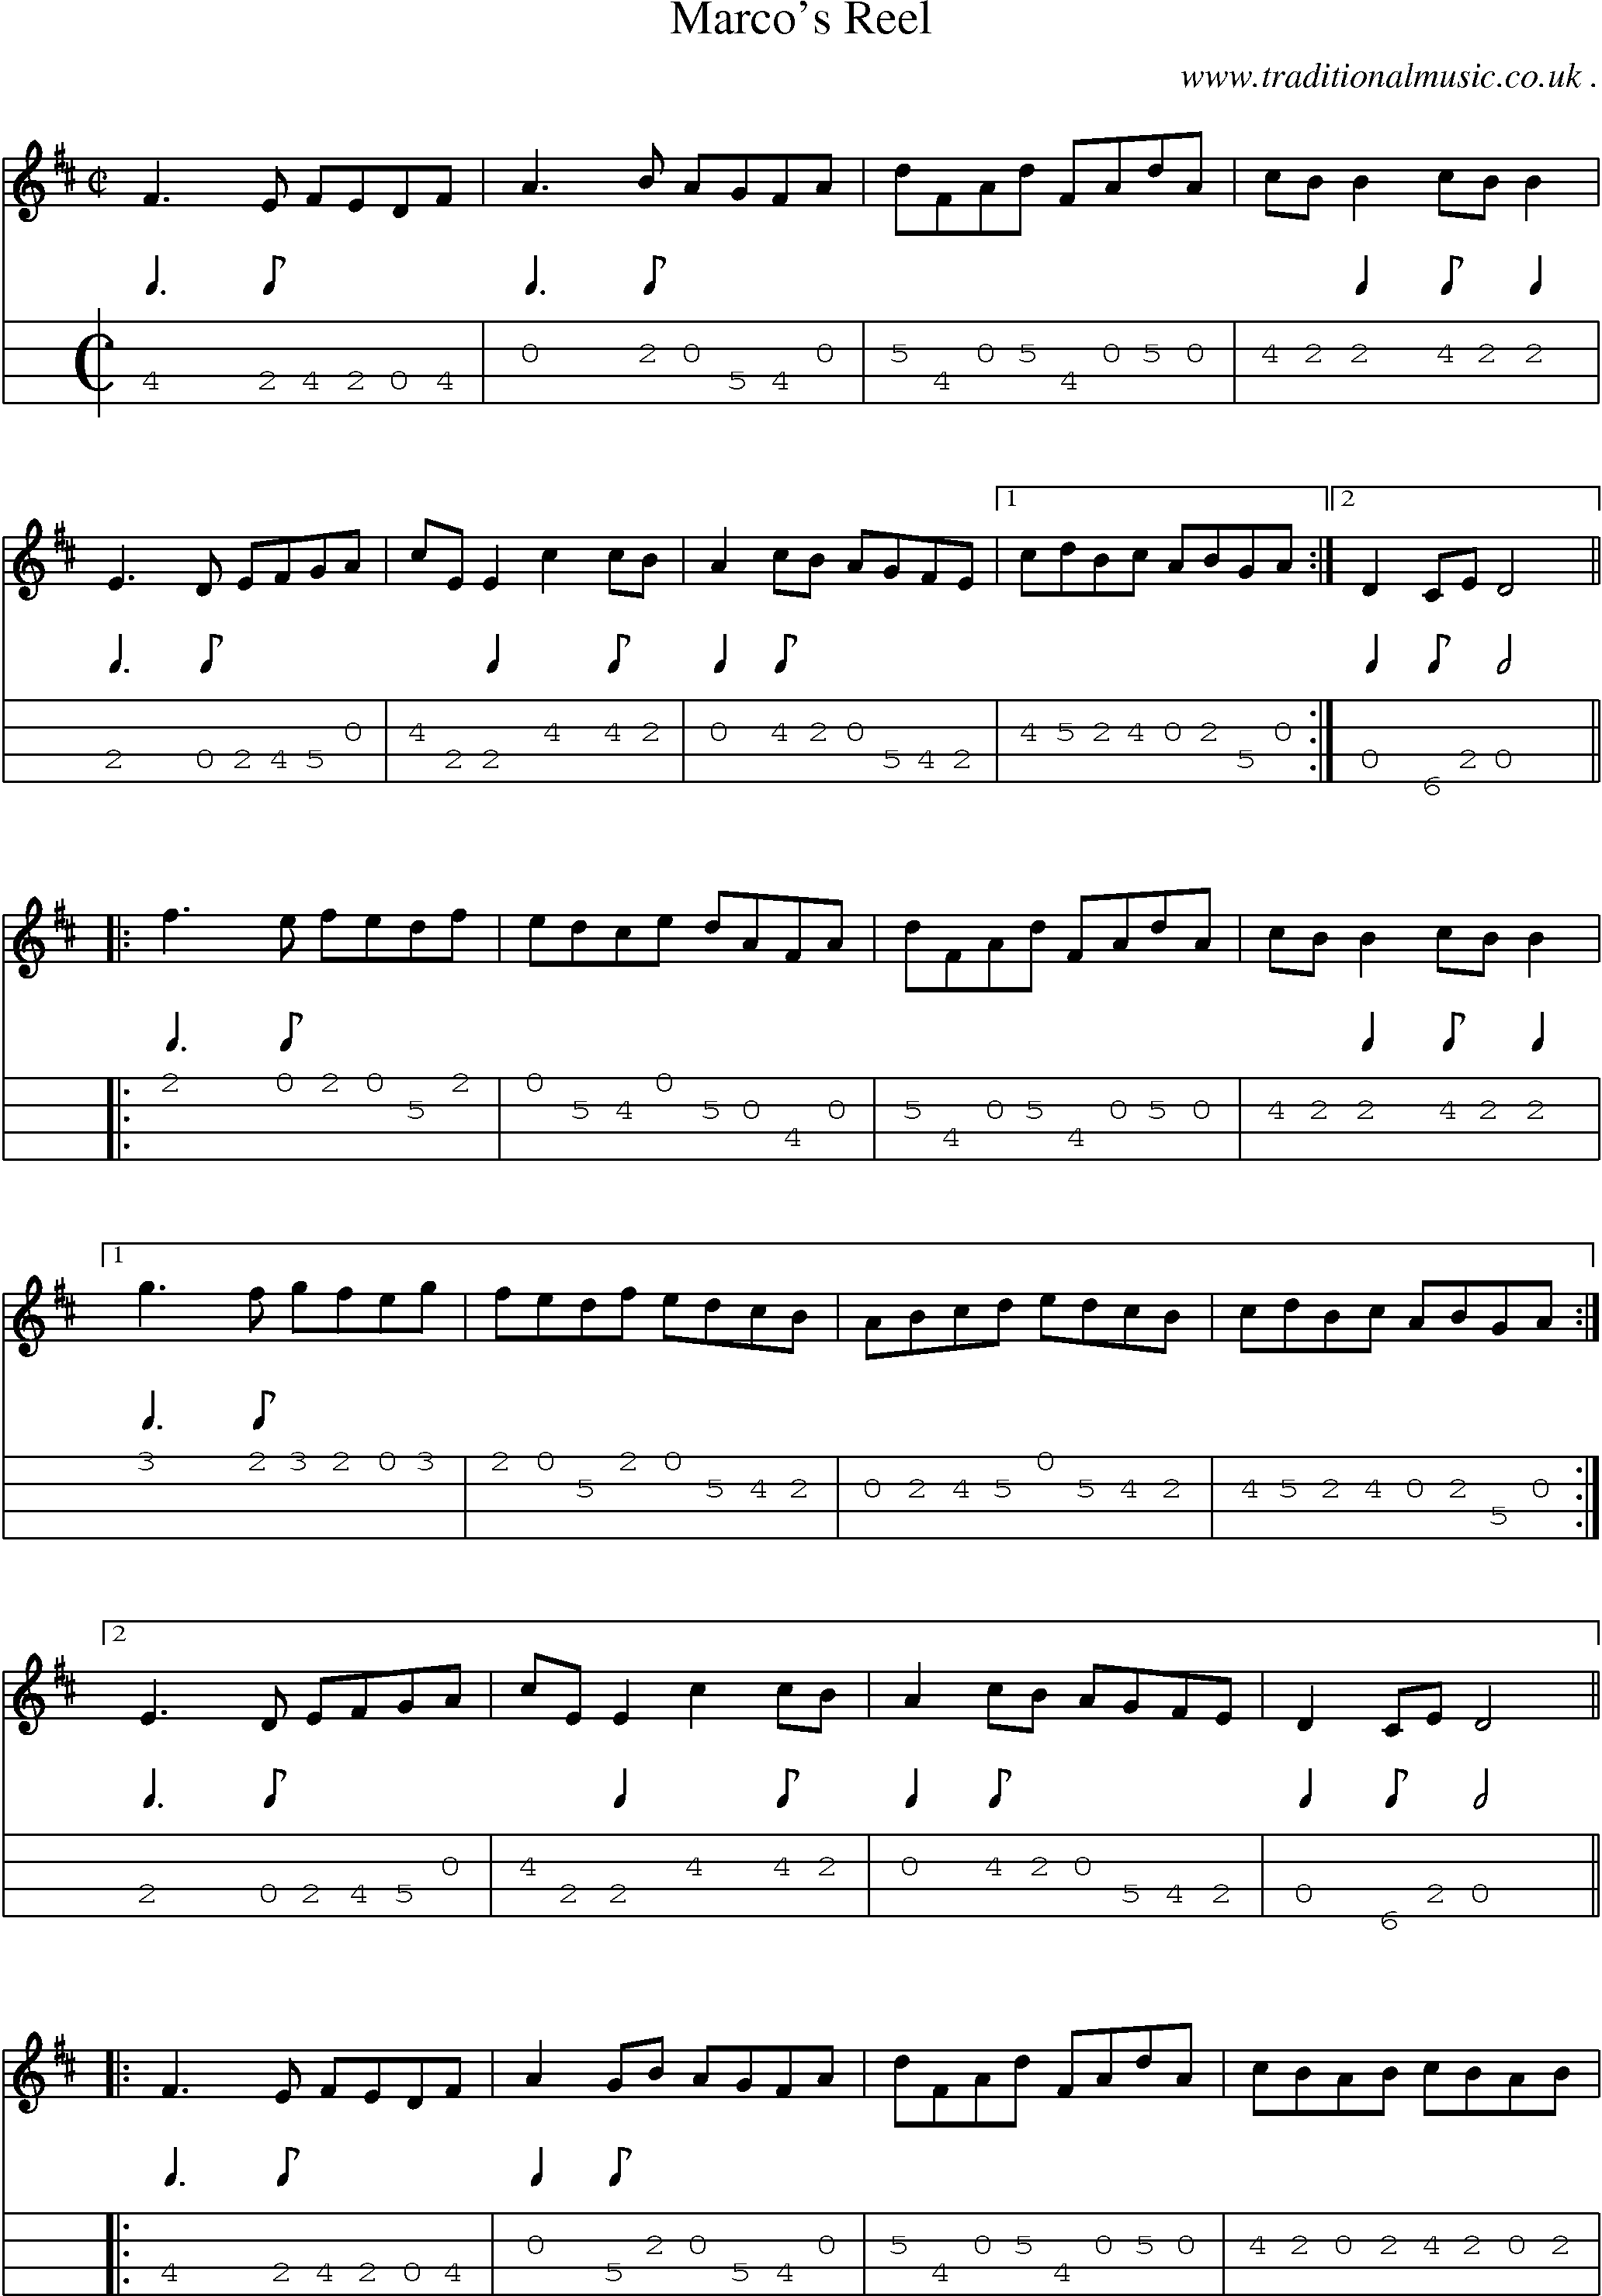 Sheet-Music and Mandolin Tabs for Marcos Reel